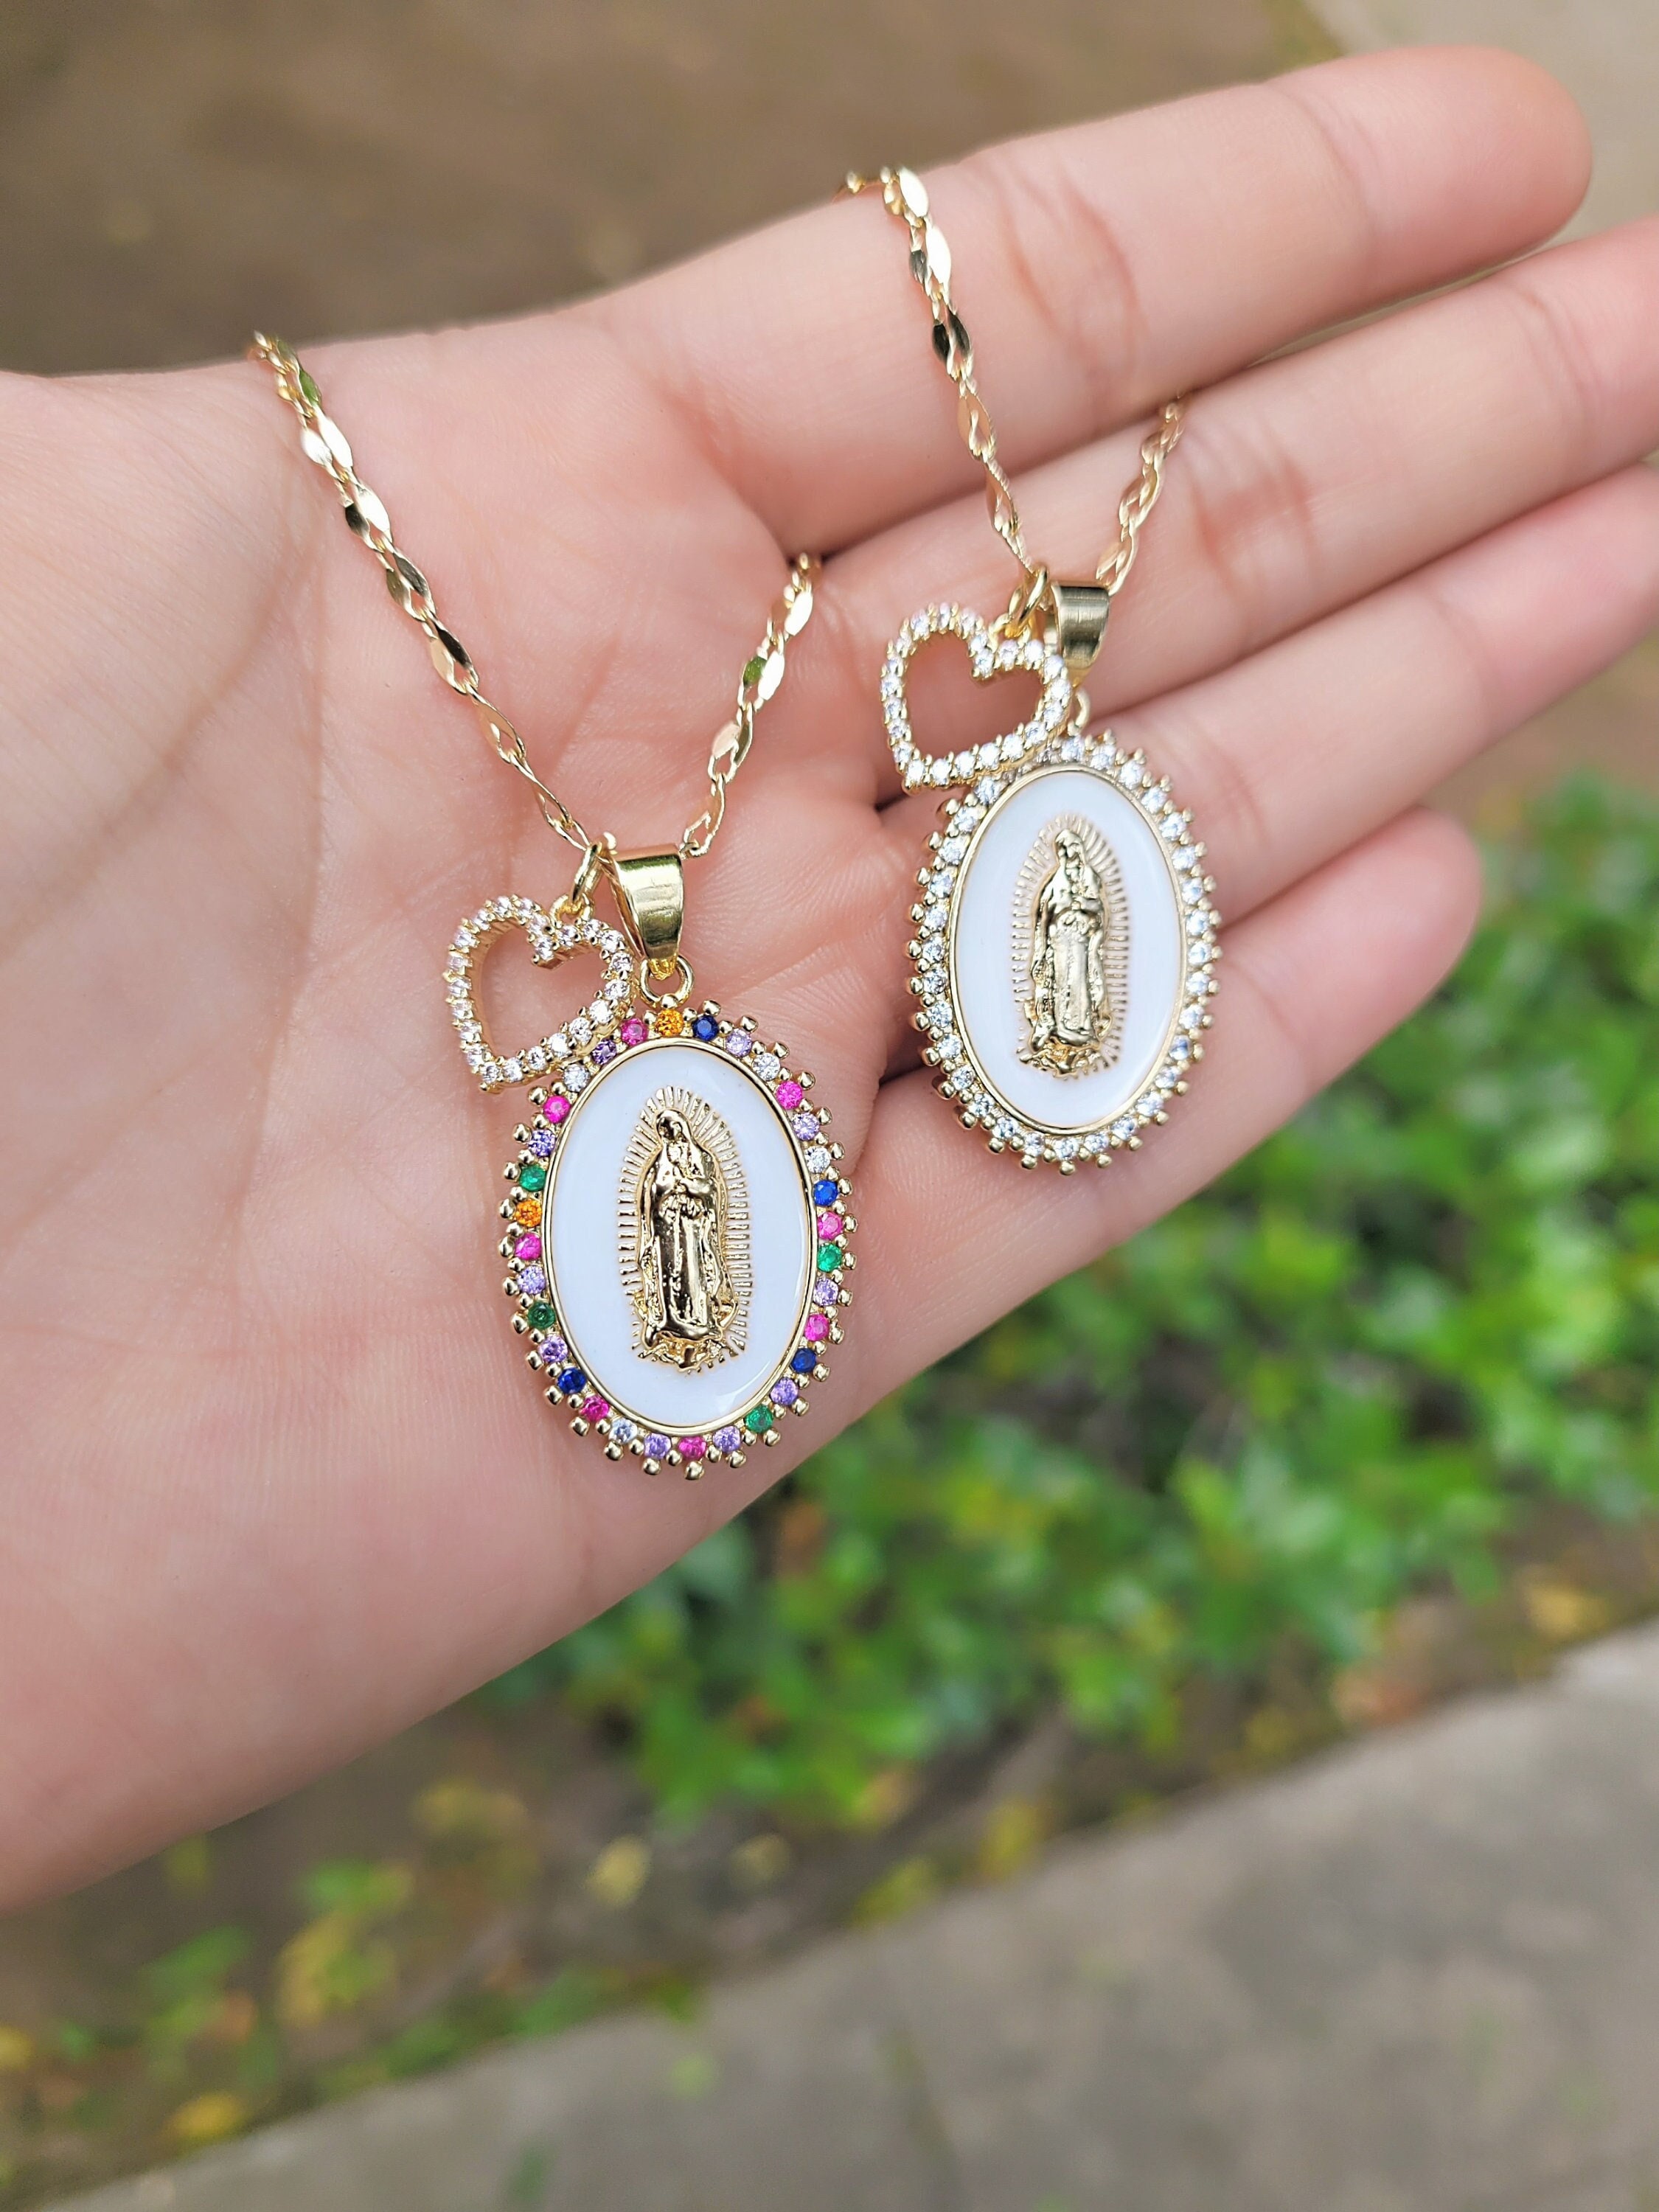 Our Lady of Guadalupe Gold Necklace. Gold Filled. Virgen De